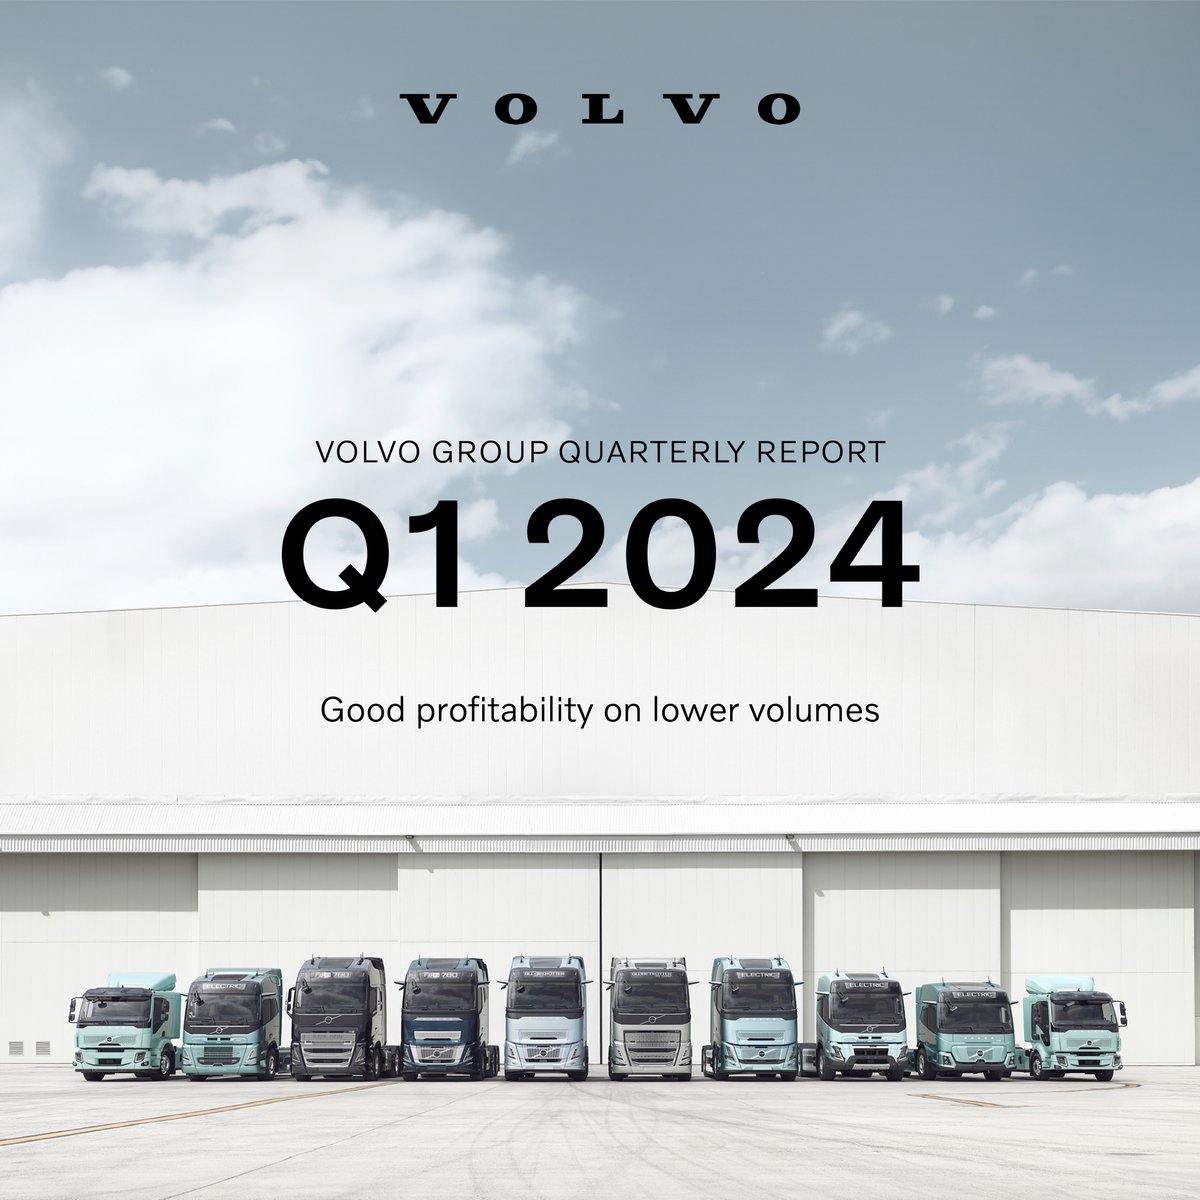 We are soon live! Watch the online presentation of the #Q1 report with our President and CEO Martin Lundstedt and CFO Mats Backman at 9.00 a.m. CEST: qreport.volvogroup.com/event/oqenphrL…

#VolvoGroupReport #fintwit #financialreport #quarterlyreport #volvo